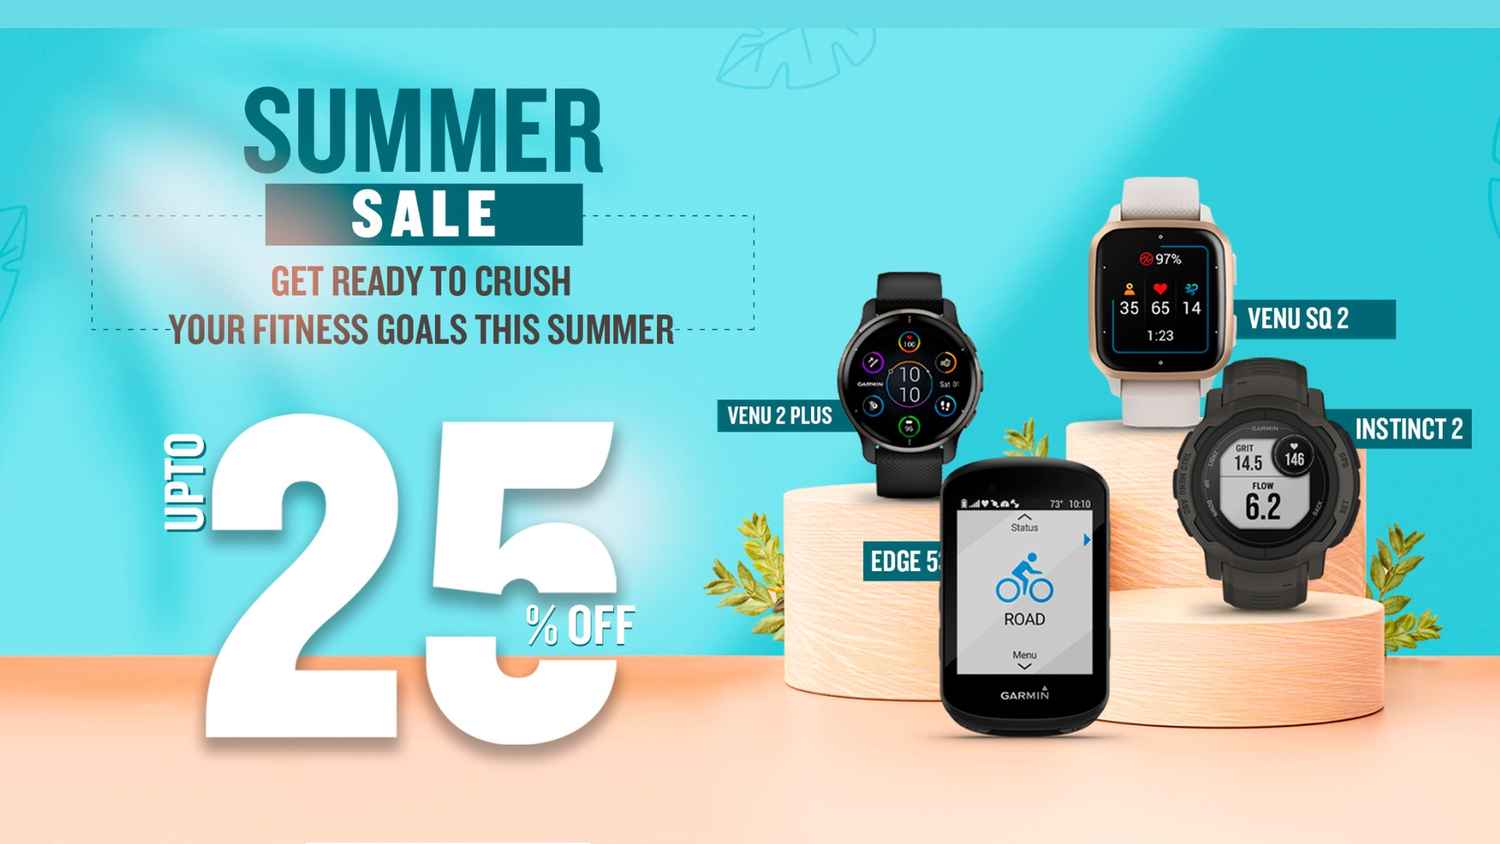 Garmin Summer Sale offers 5 smartwatches with a minimum ₹5000 discount